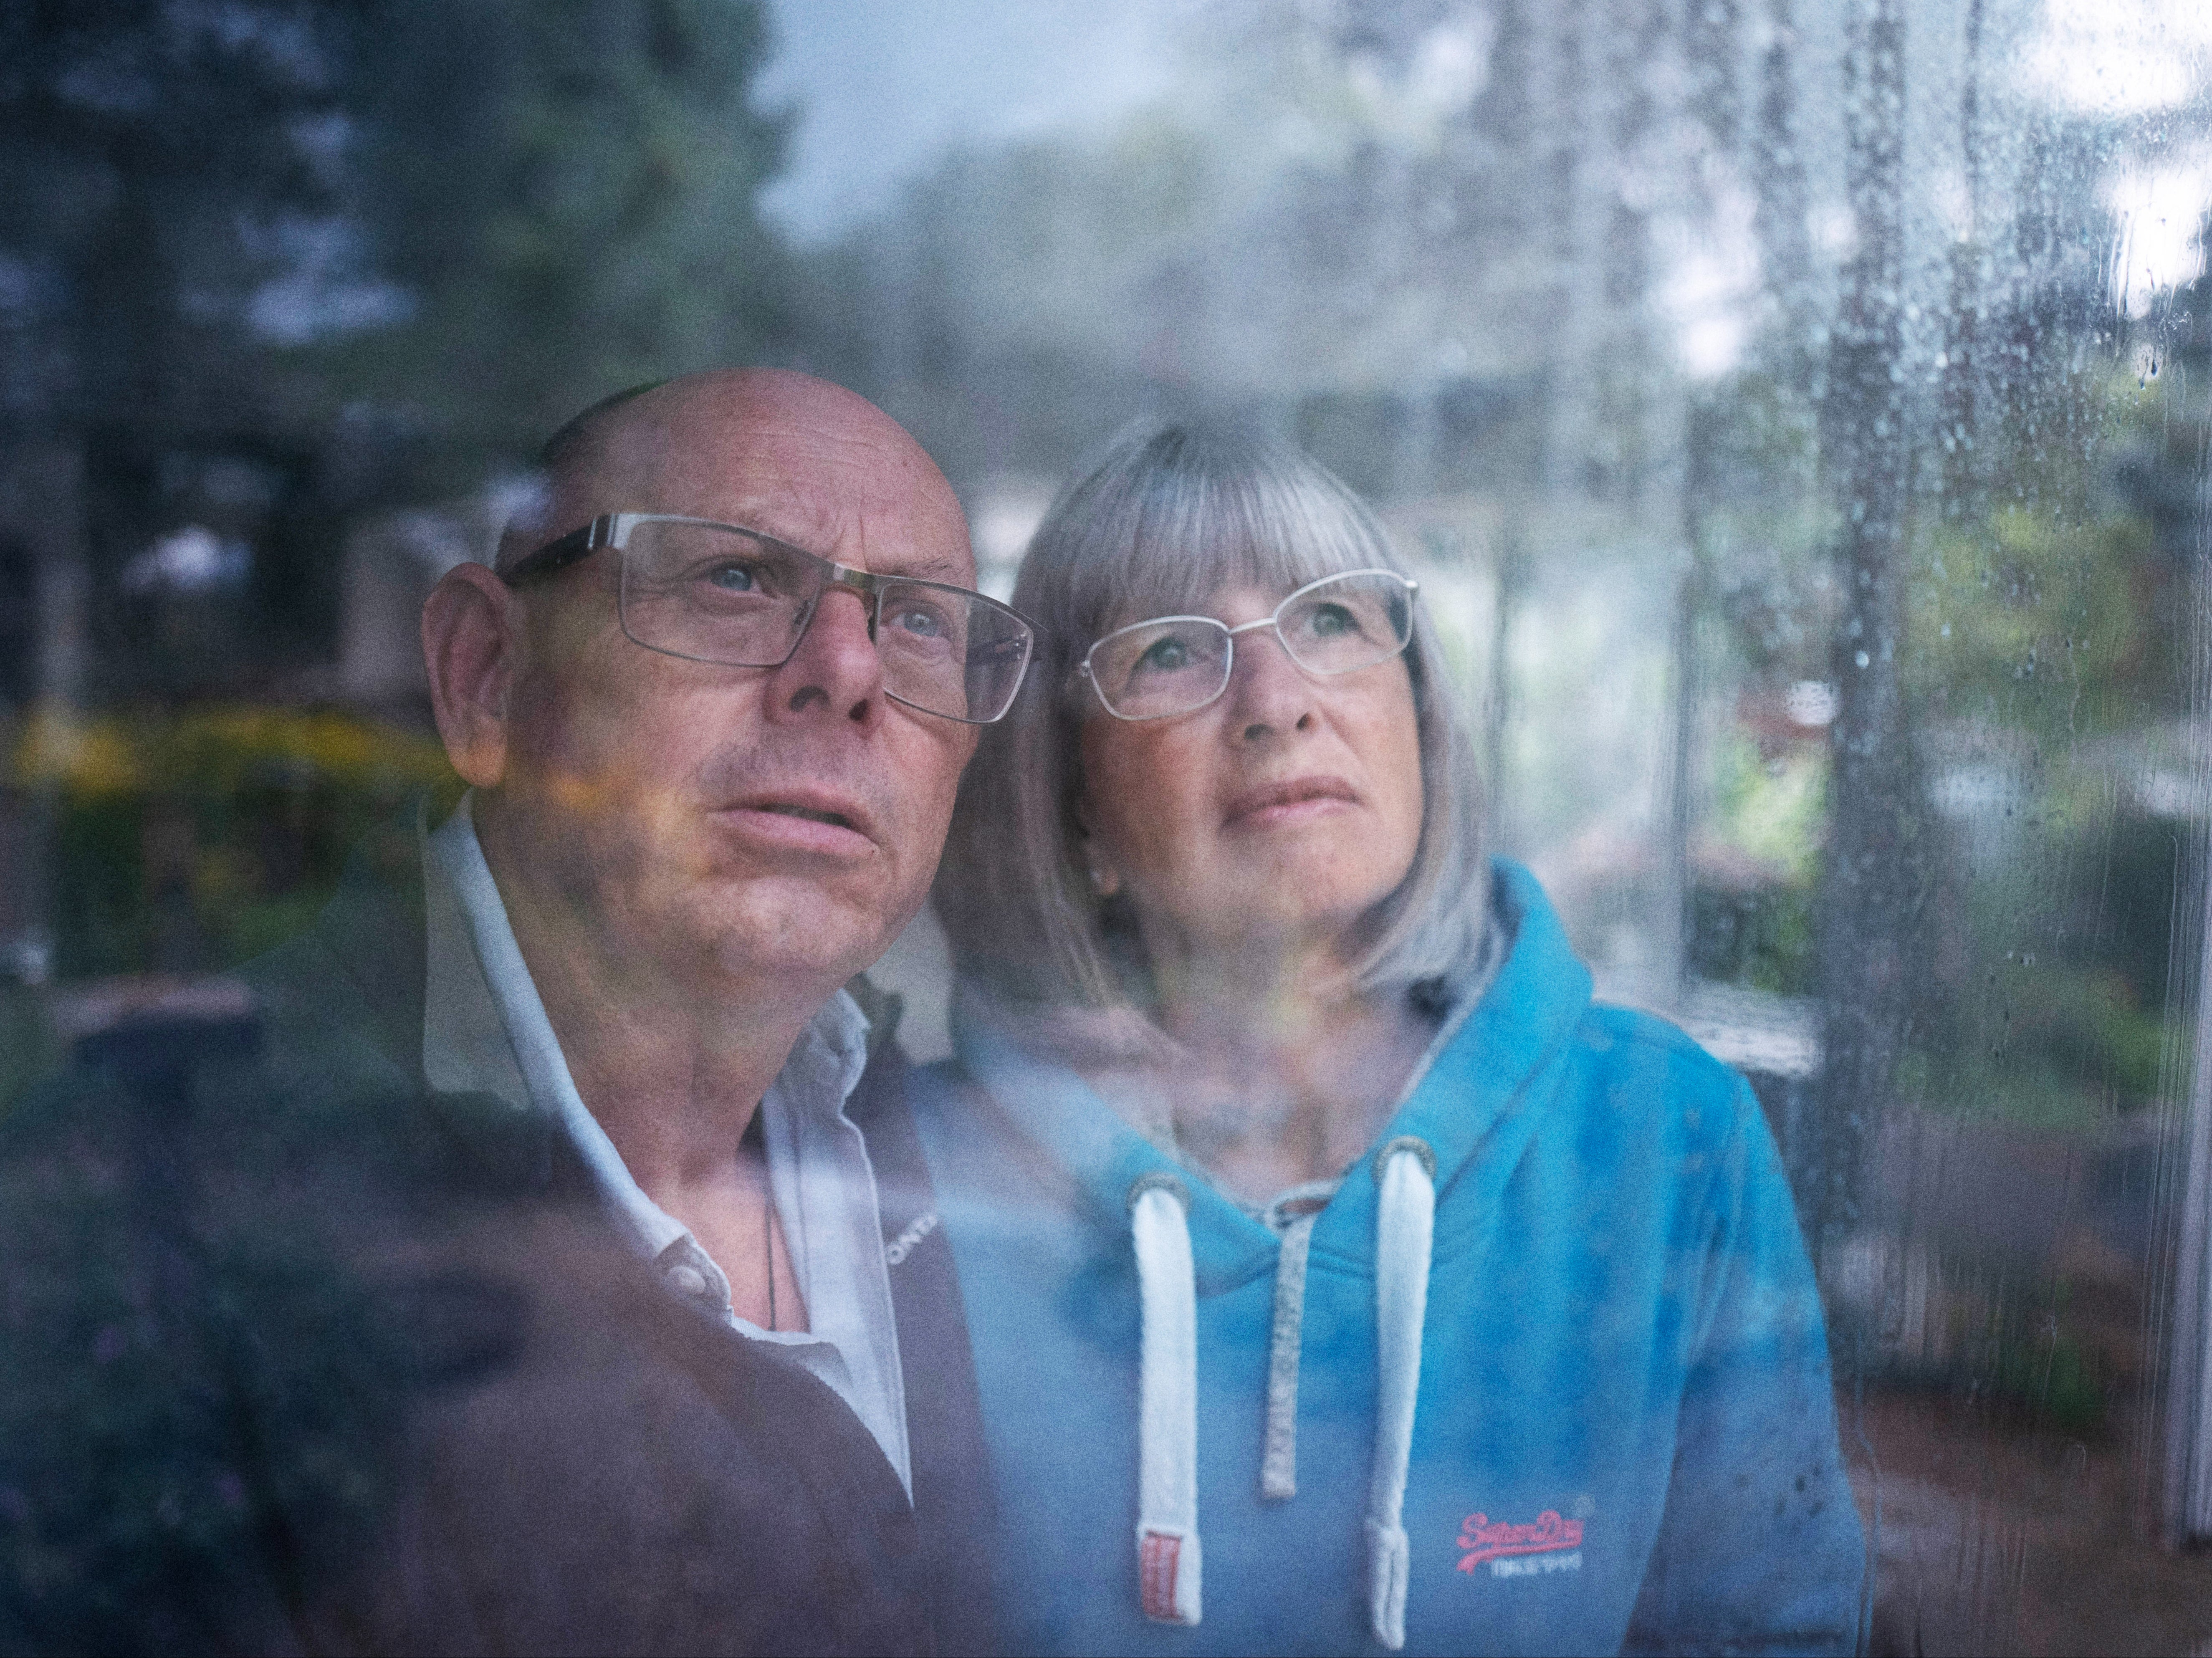 First-time flood victims Roger and Linda Walsh watch the rain from their home in Rendenhall, Norfolk